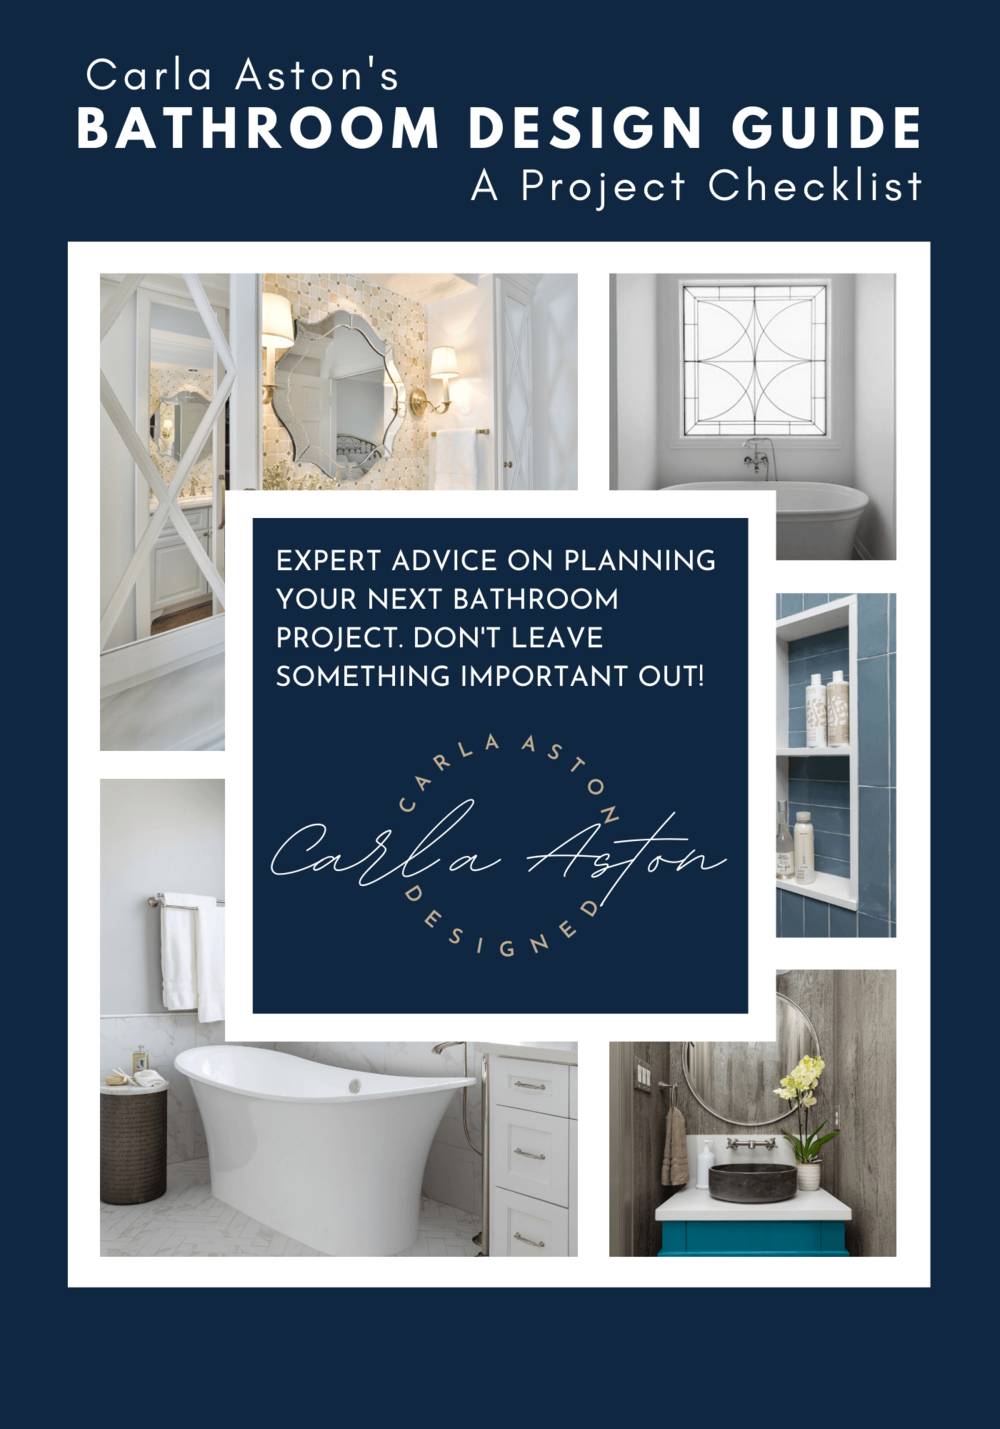 Bathroom Design Guide - Downloadable pdf with advice, tips and a checklist so that you don’t forget to think through everything you will need to design the bathroom of your dreams.  | carlaaston.com